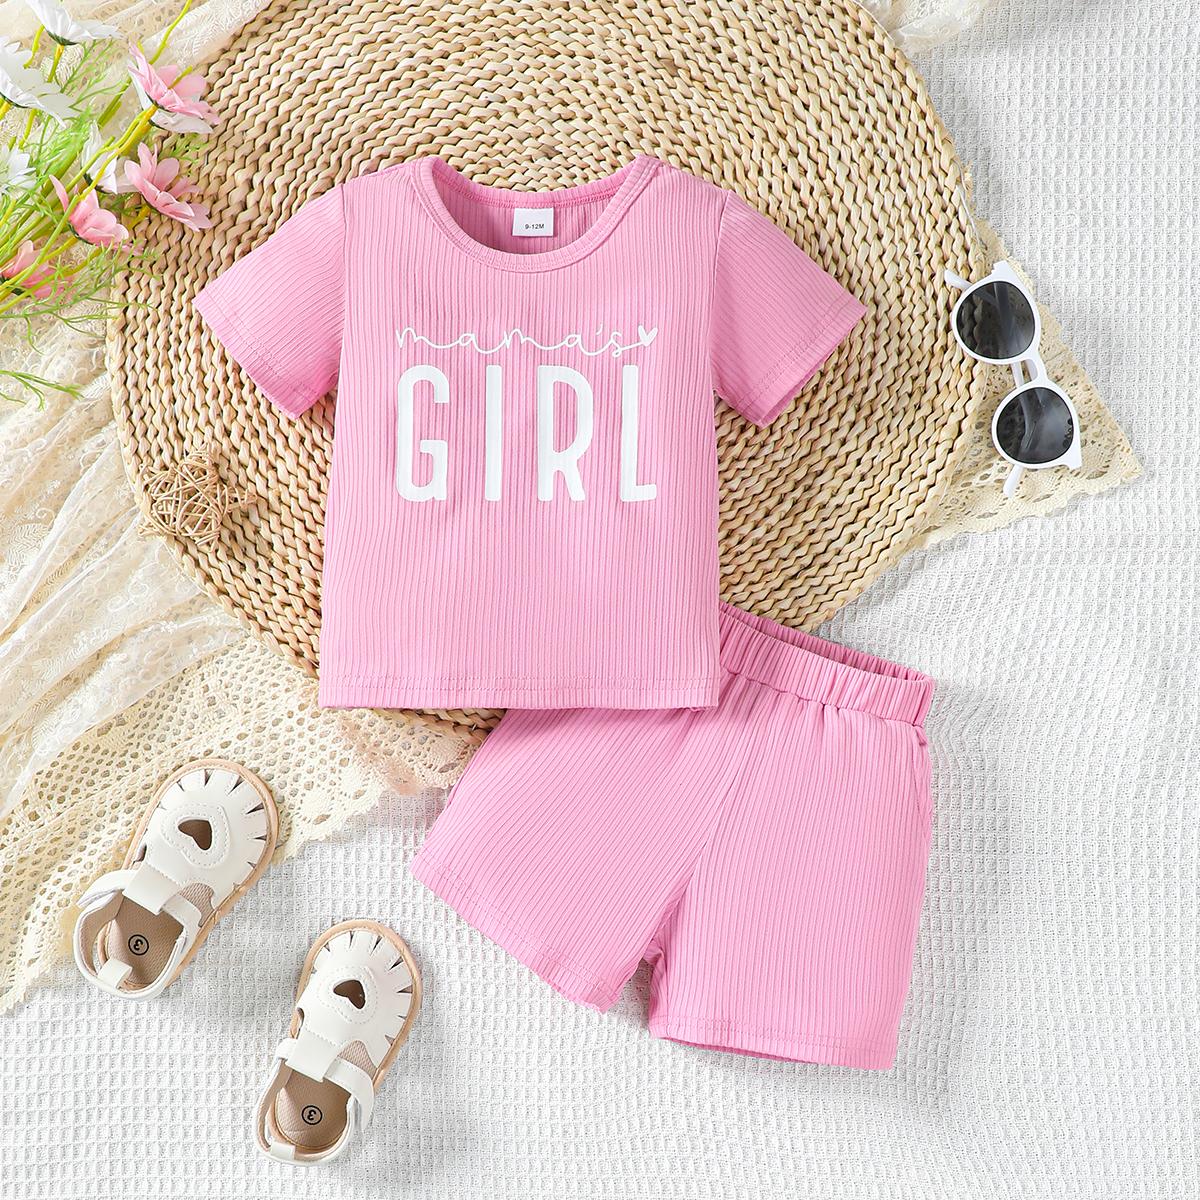 6M-3Y Ready Stock Baby Girls Summer Outfits "Mama's Girl" Print Casual Set, Ribbed T-shirt & Shorts, 2Pcs Clothes From 6M-3Y Catpapa GS132312159